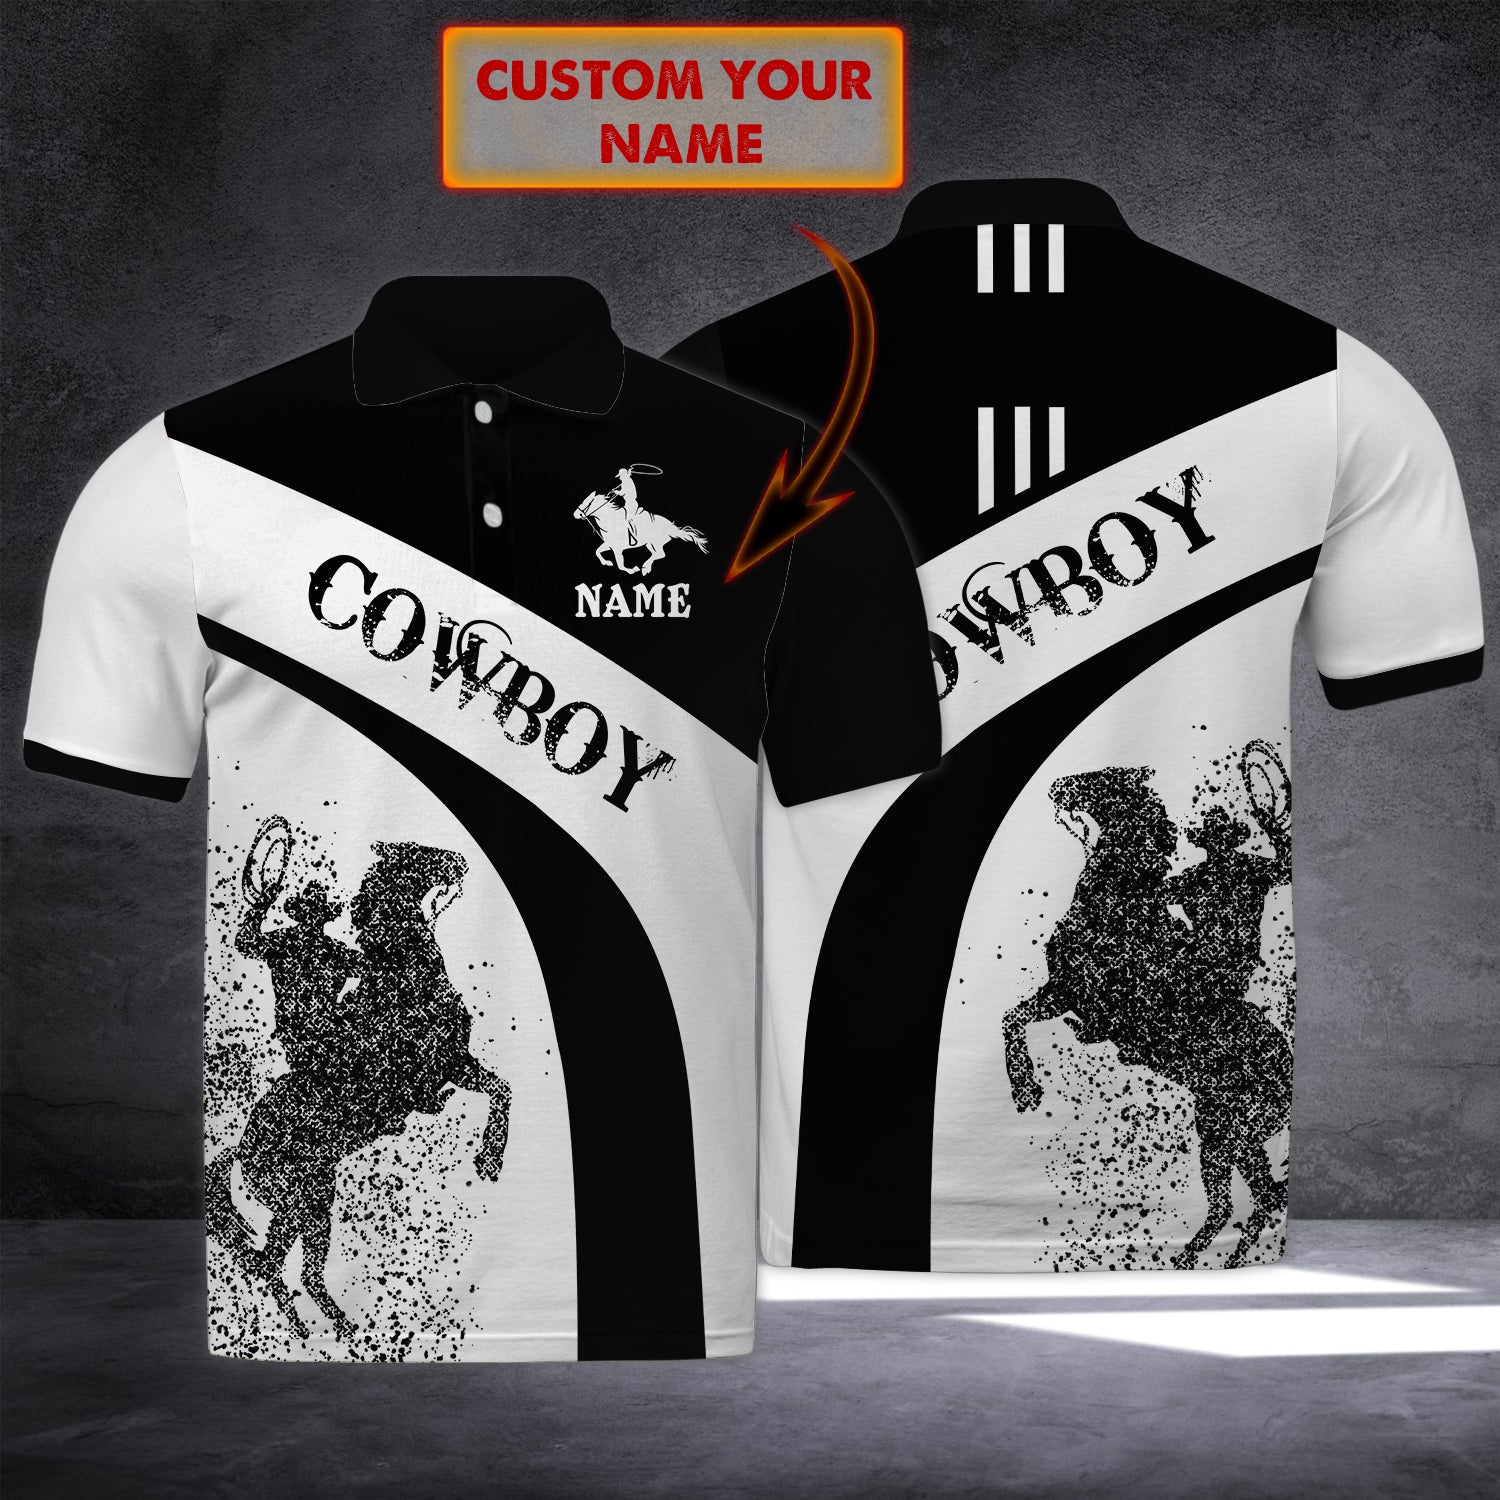 Cow Boy - Personalized Name 3D Polo Shirt -Loop- Ntp-241